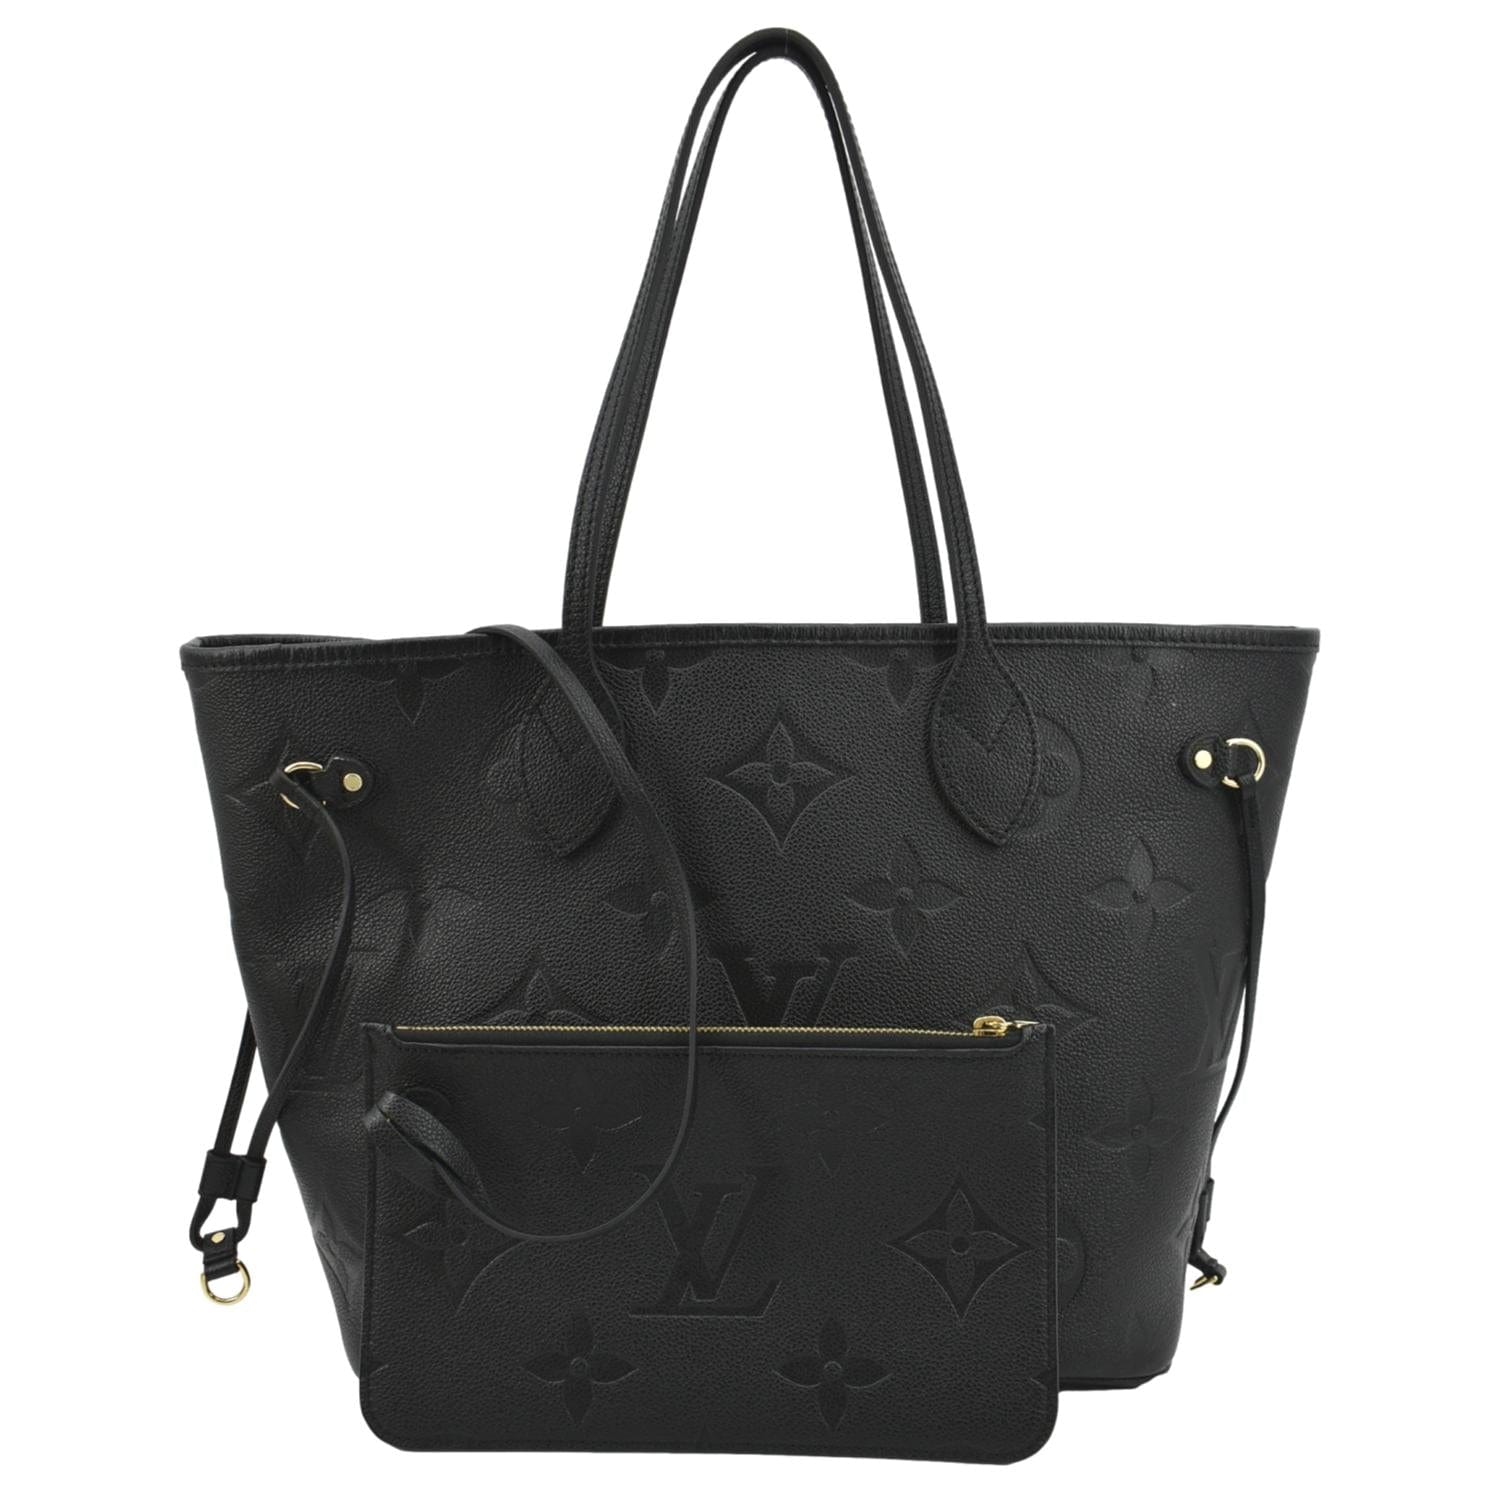 Shop Louis Vuitton Sac Neverfull MM by luxefashionsbyparis